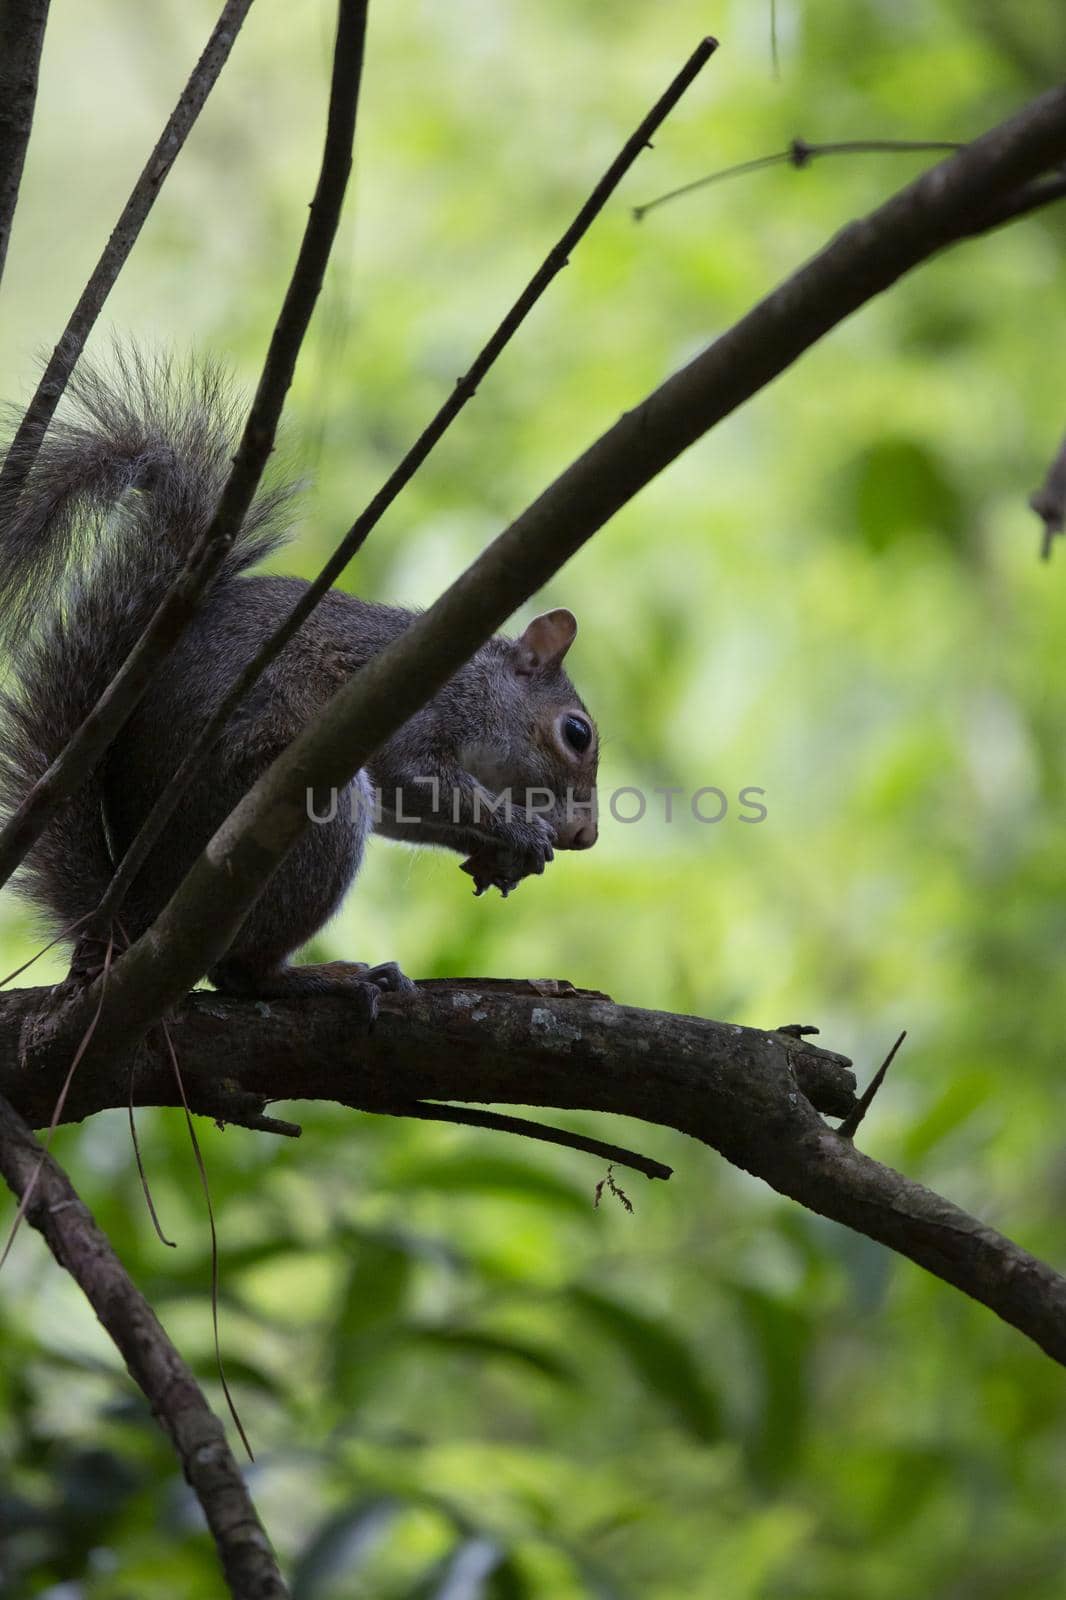 Squirrel eating from a pecan shell as it perches on a limb